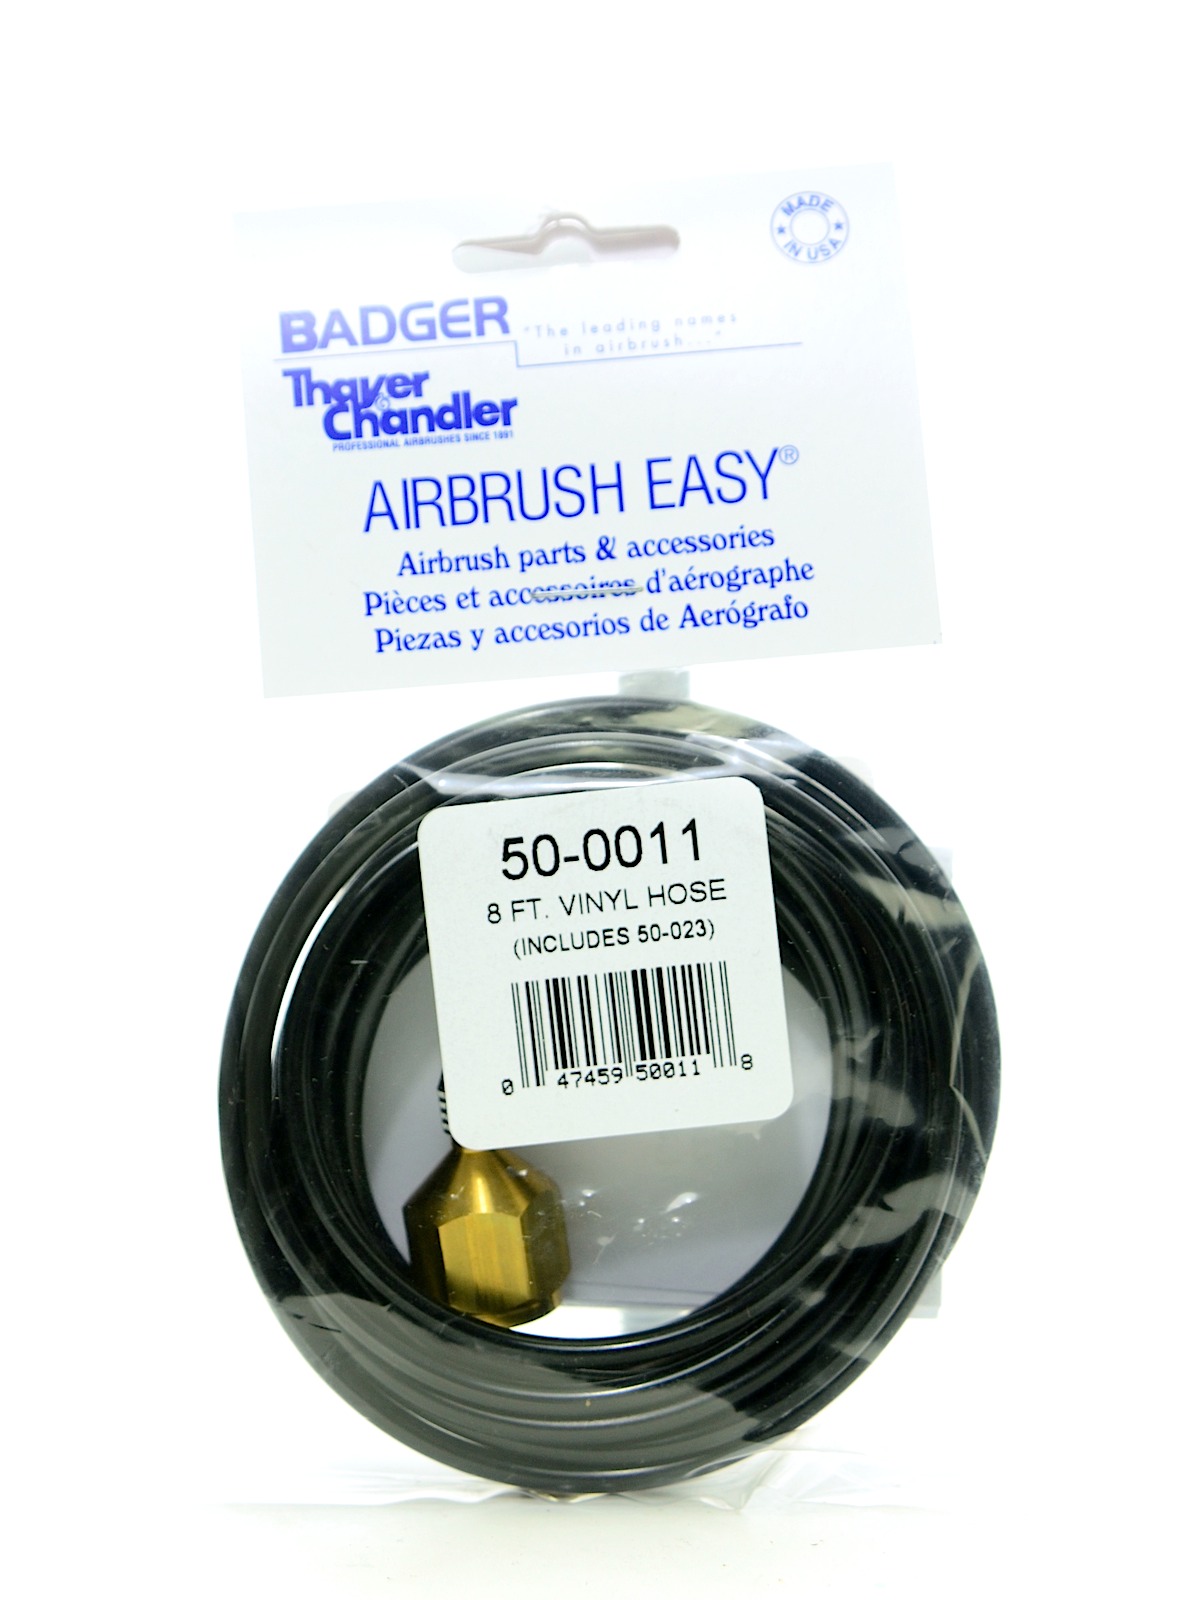 Airbrush Parts 8 ft. vinyl hose with compressor adapter included  50-0011